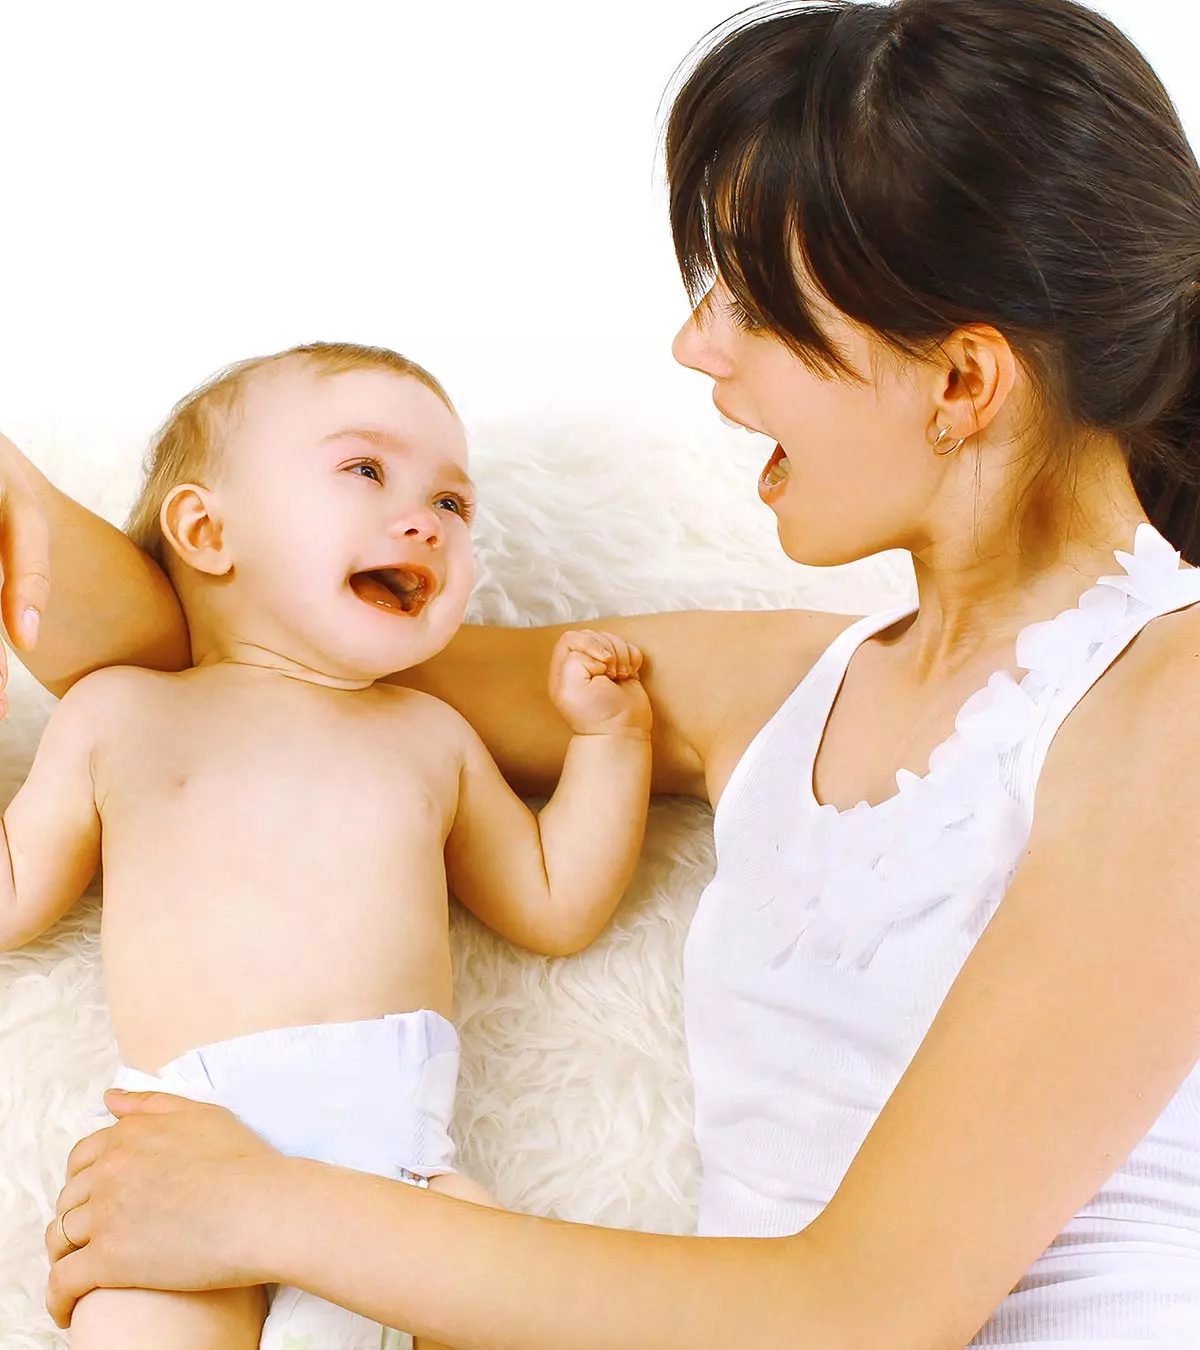 A smiling baby can also brighten up your mood and energize you.